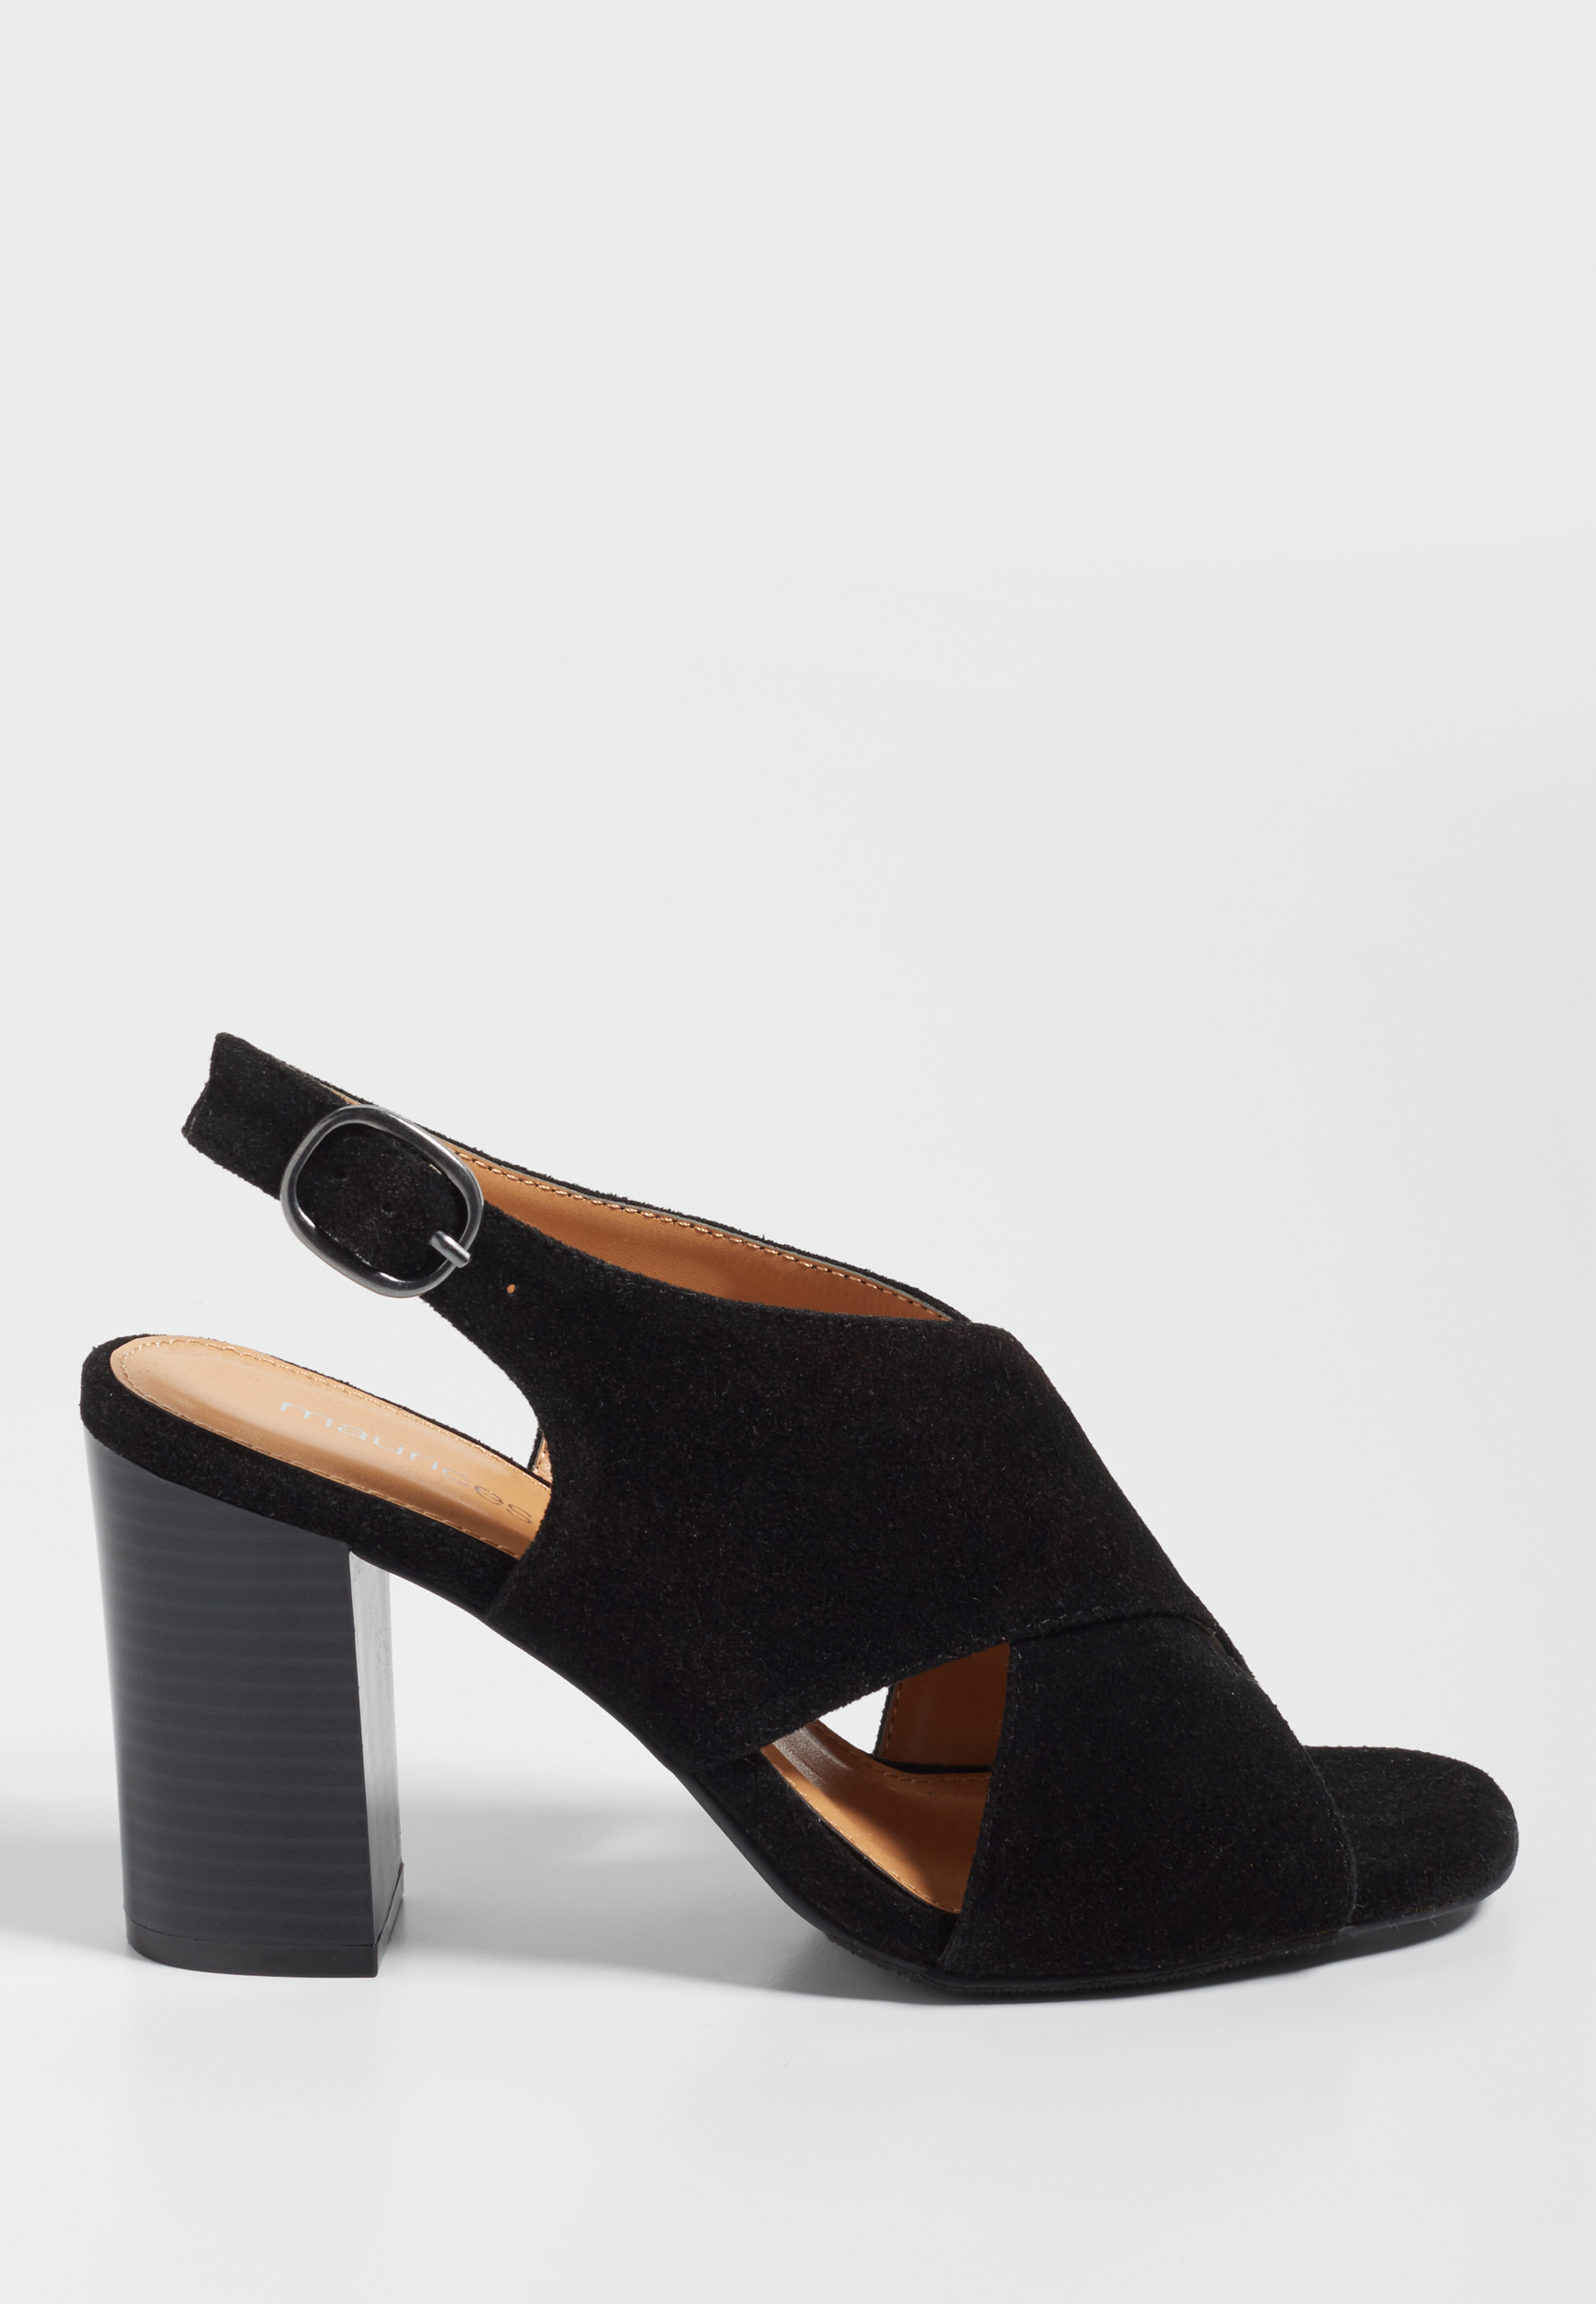 Jane criss cross faux suede heel | maurices